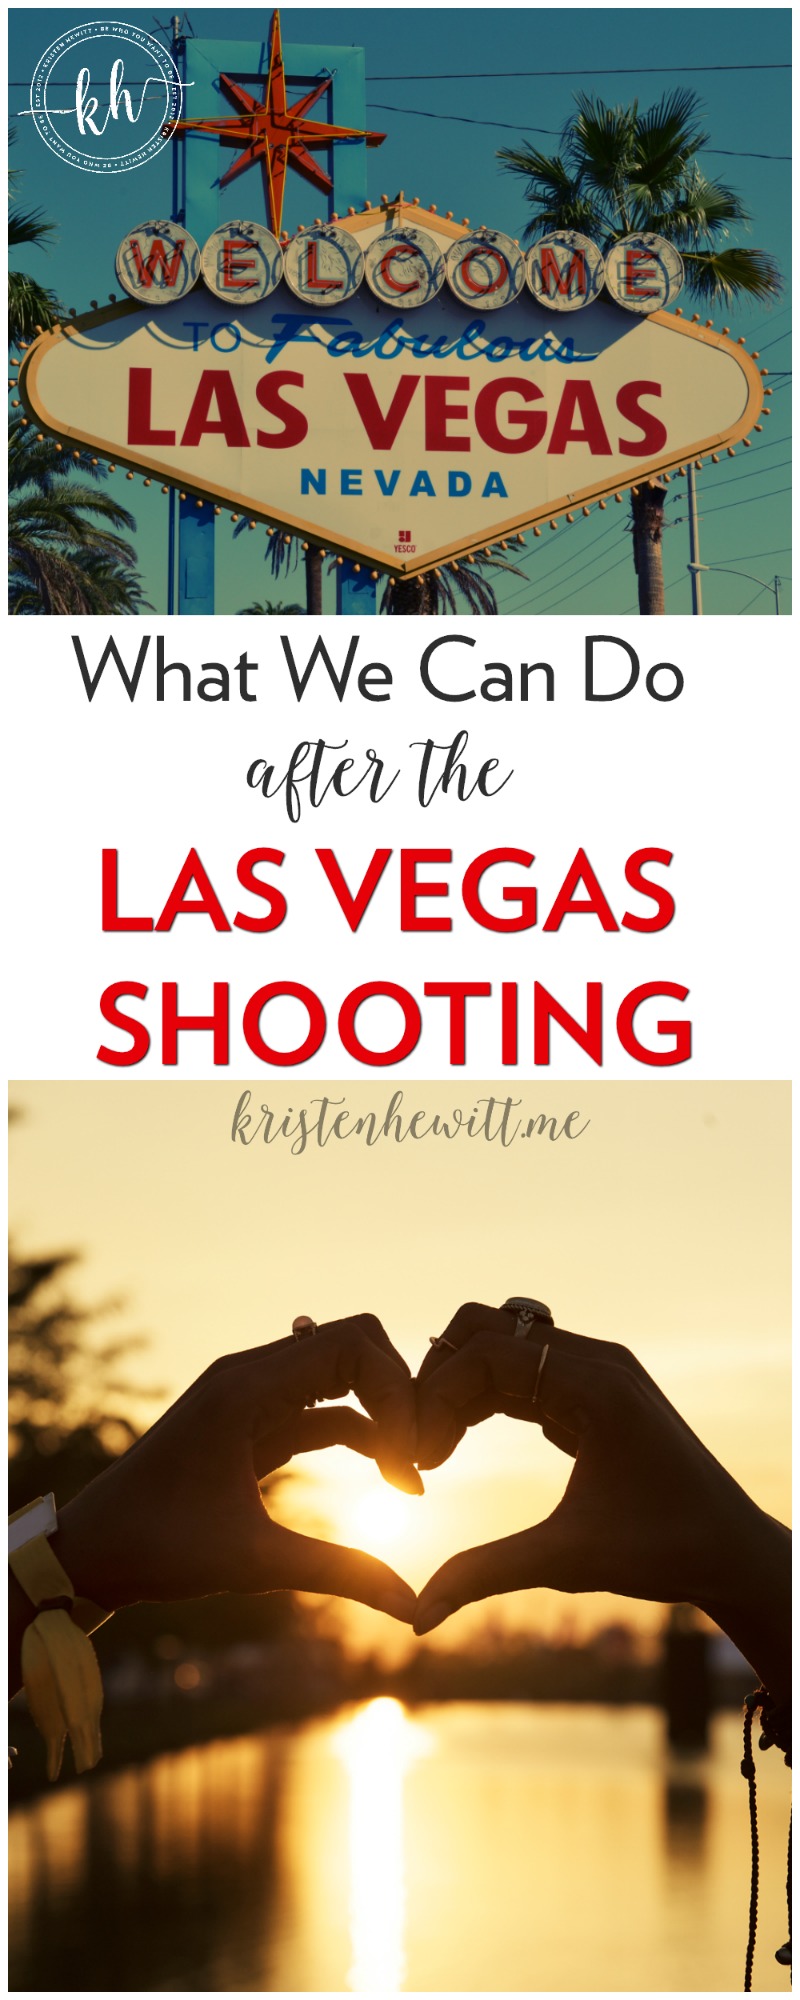 It happened again, this time a shooting in Las Vegas. But what can we do? This. Here's what we can do after the Las Vegas Shooting. 